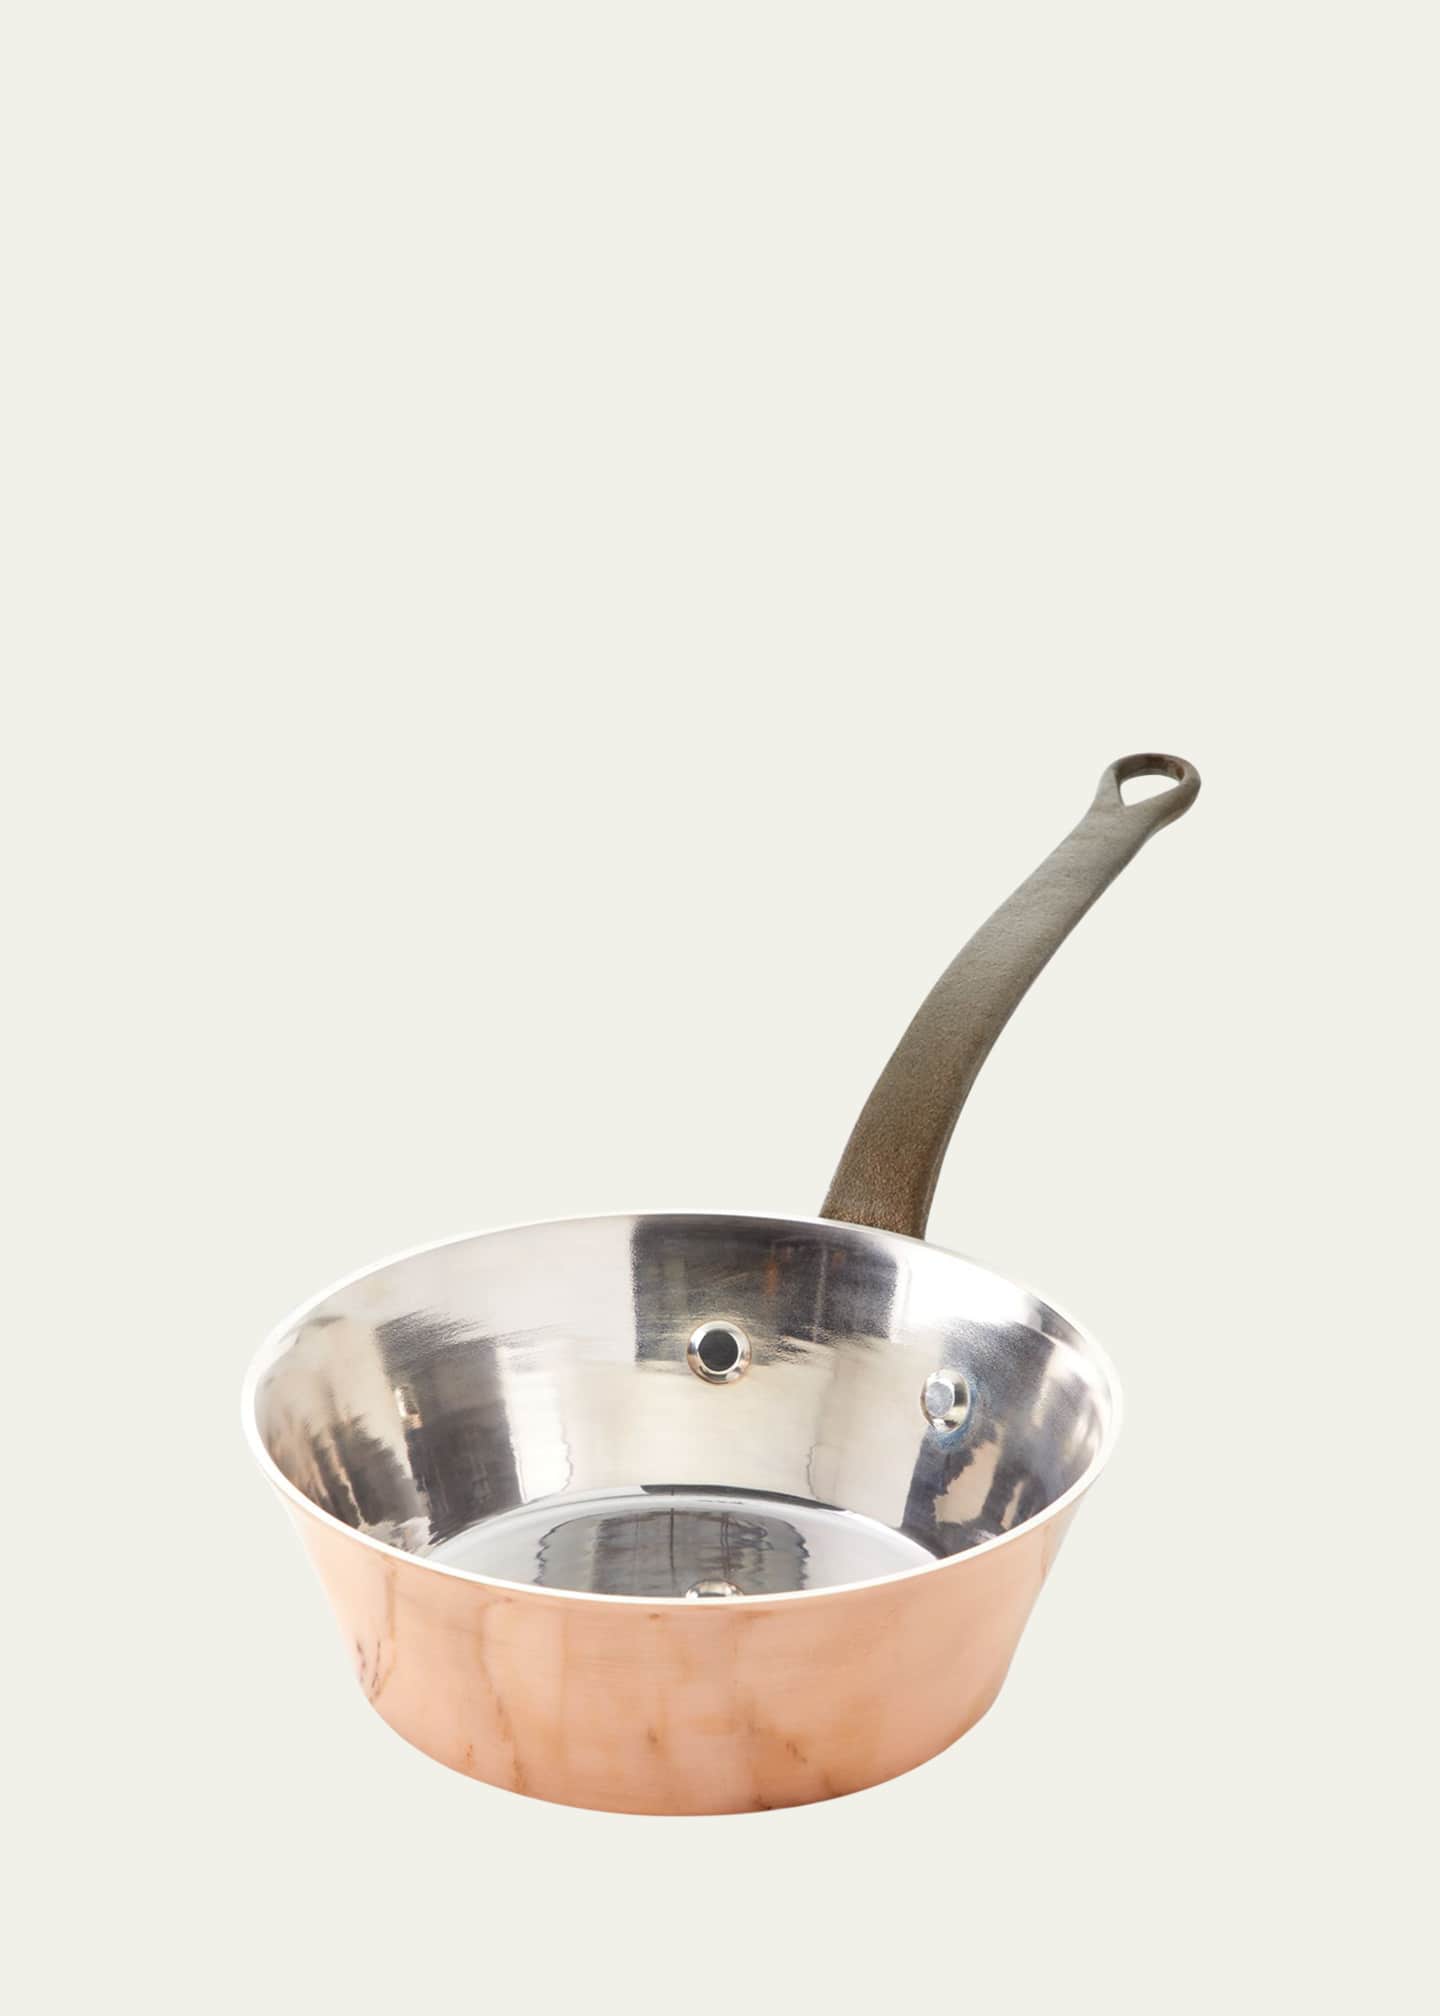 Duparquet Copper Cookware Solid Copper Silver-Lined Splayed Sauce Pan - 8.5"/2.5qt